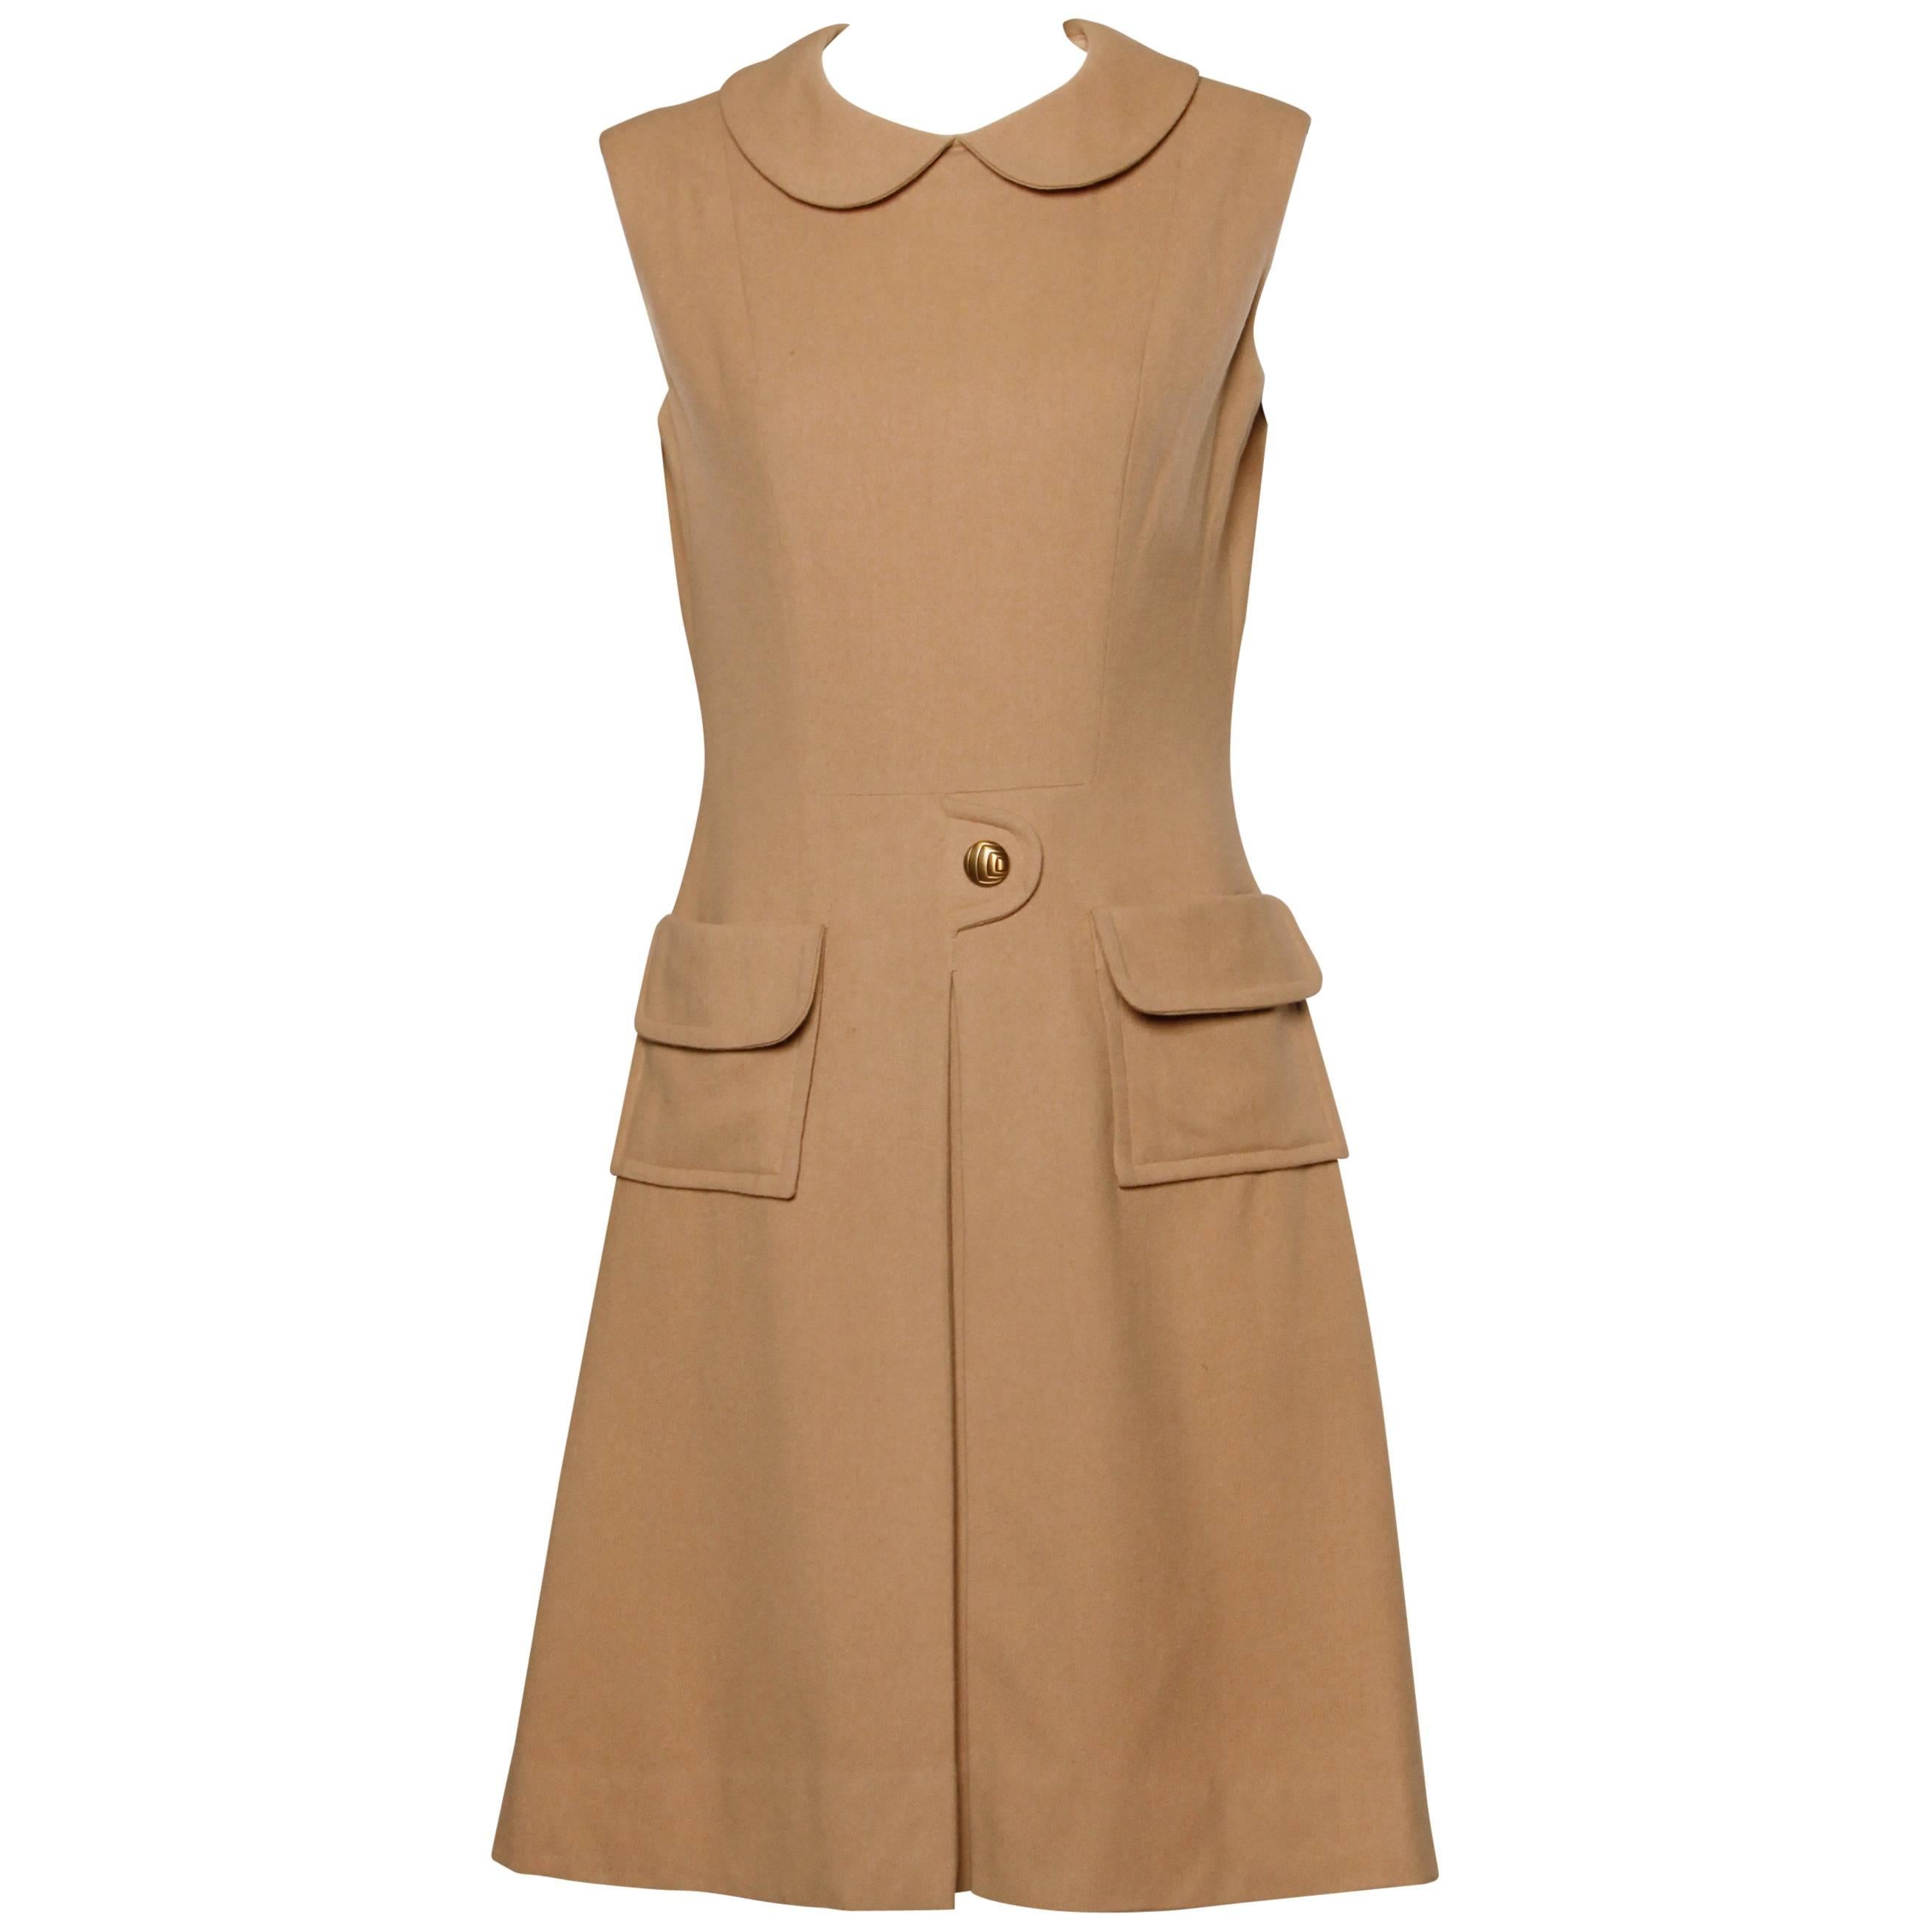 1960s Vintage Camel Wool Mod Dress with Peter Pan Collar and Kick Pleat